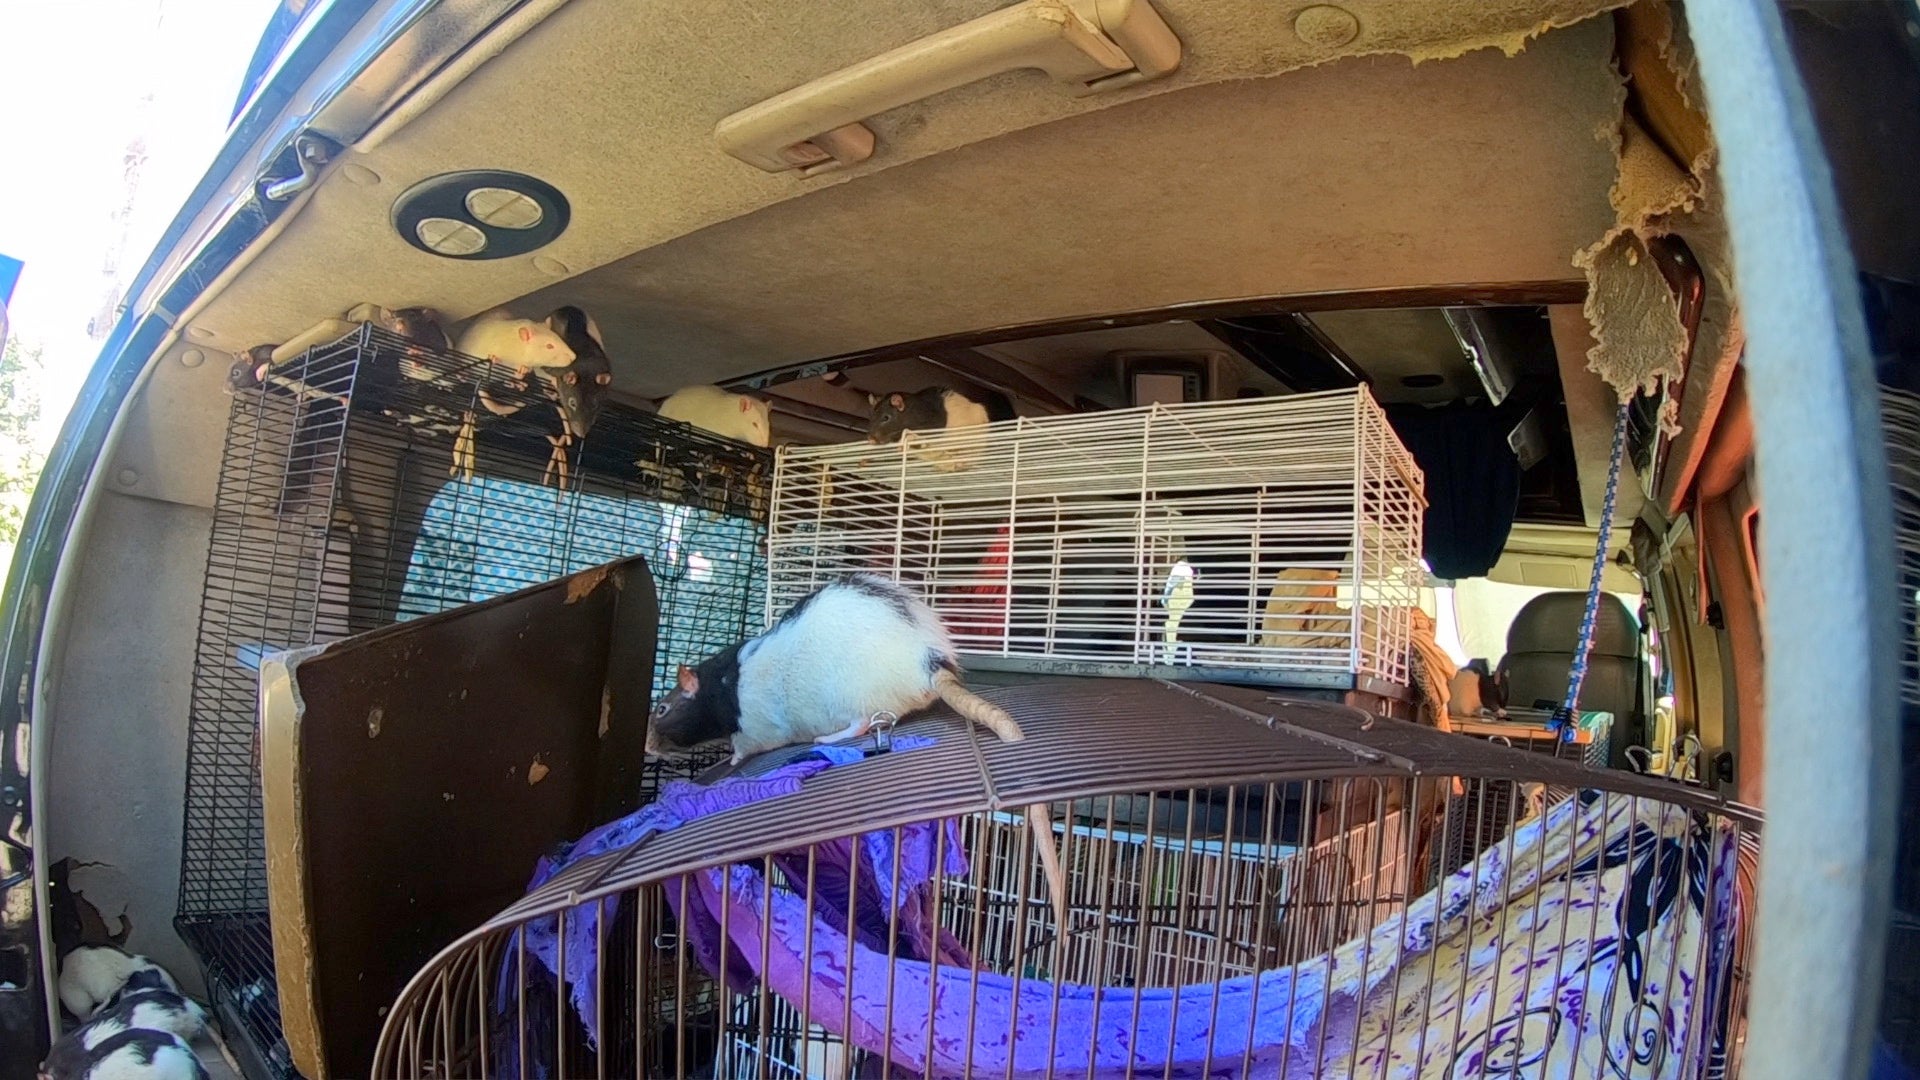 A woman who lived in a van with 320 rats in San Diego, California, has agreed to give them up for adoption.